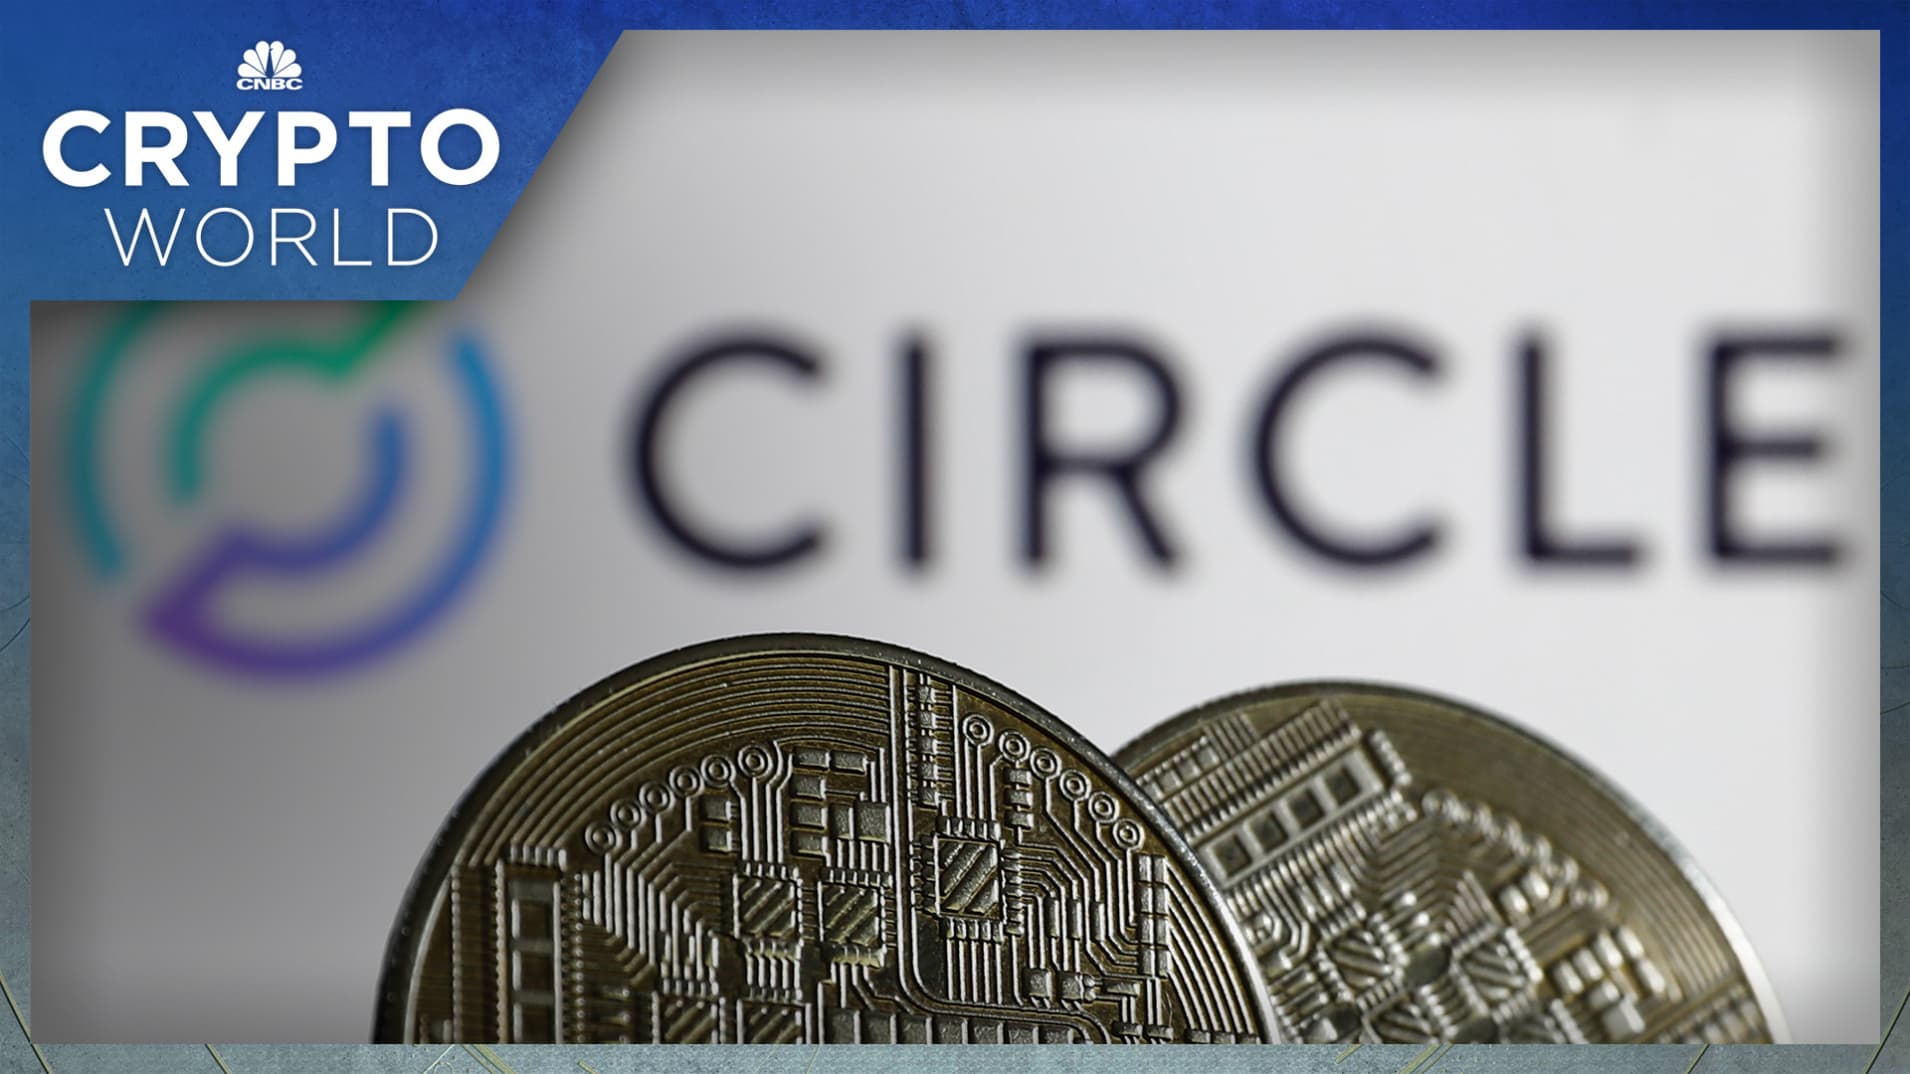 Owner of Circle Society platform, which advertised % returns, charged with fraud